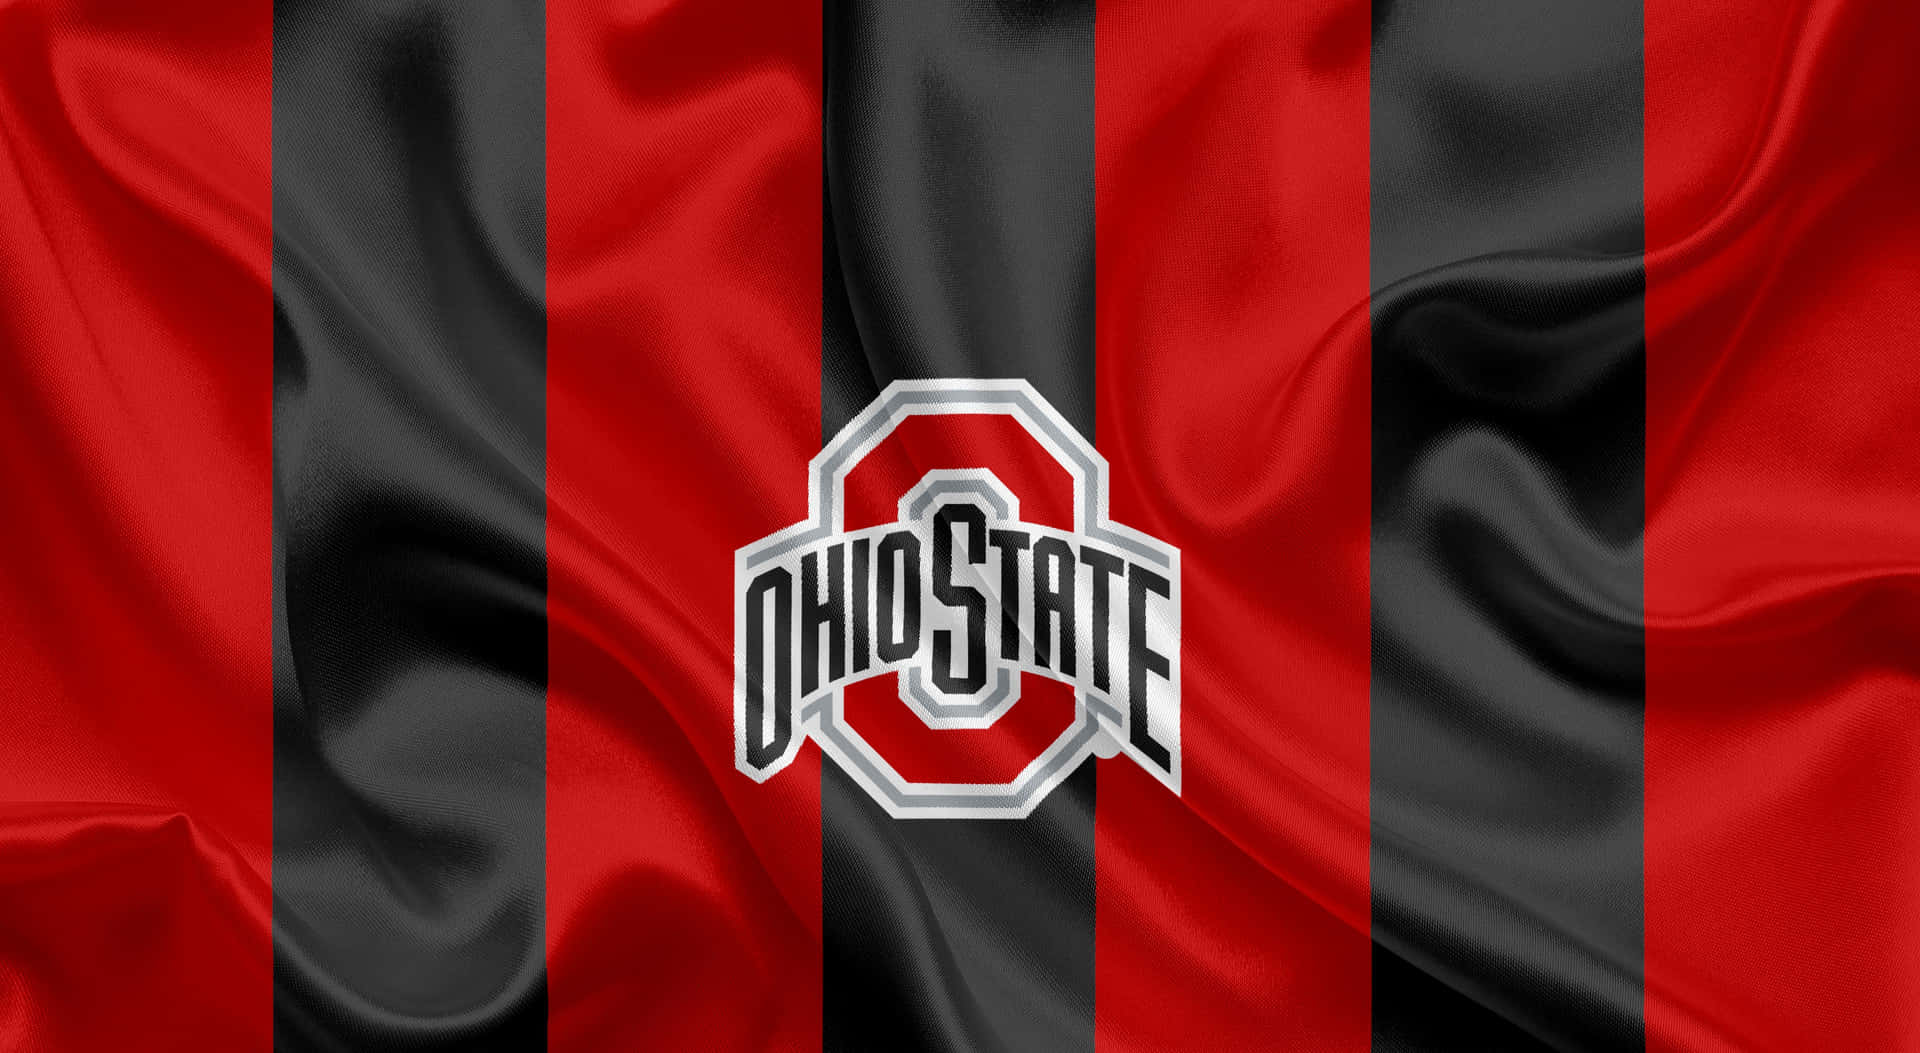 Ohio State University Logo On A Red And Black Background Wallpaper